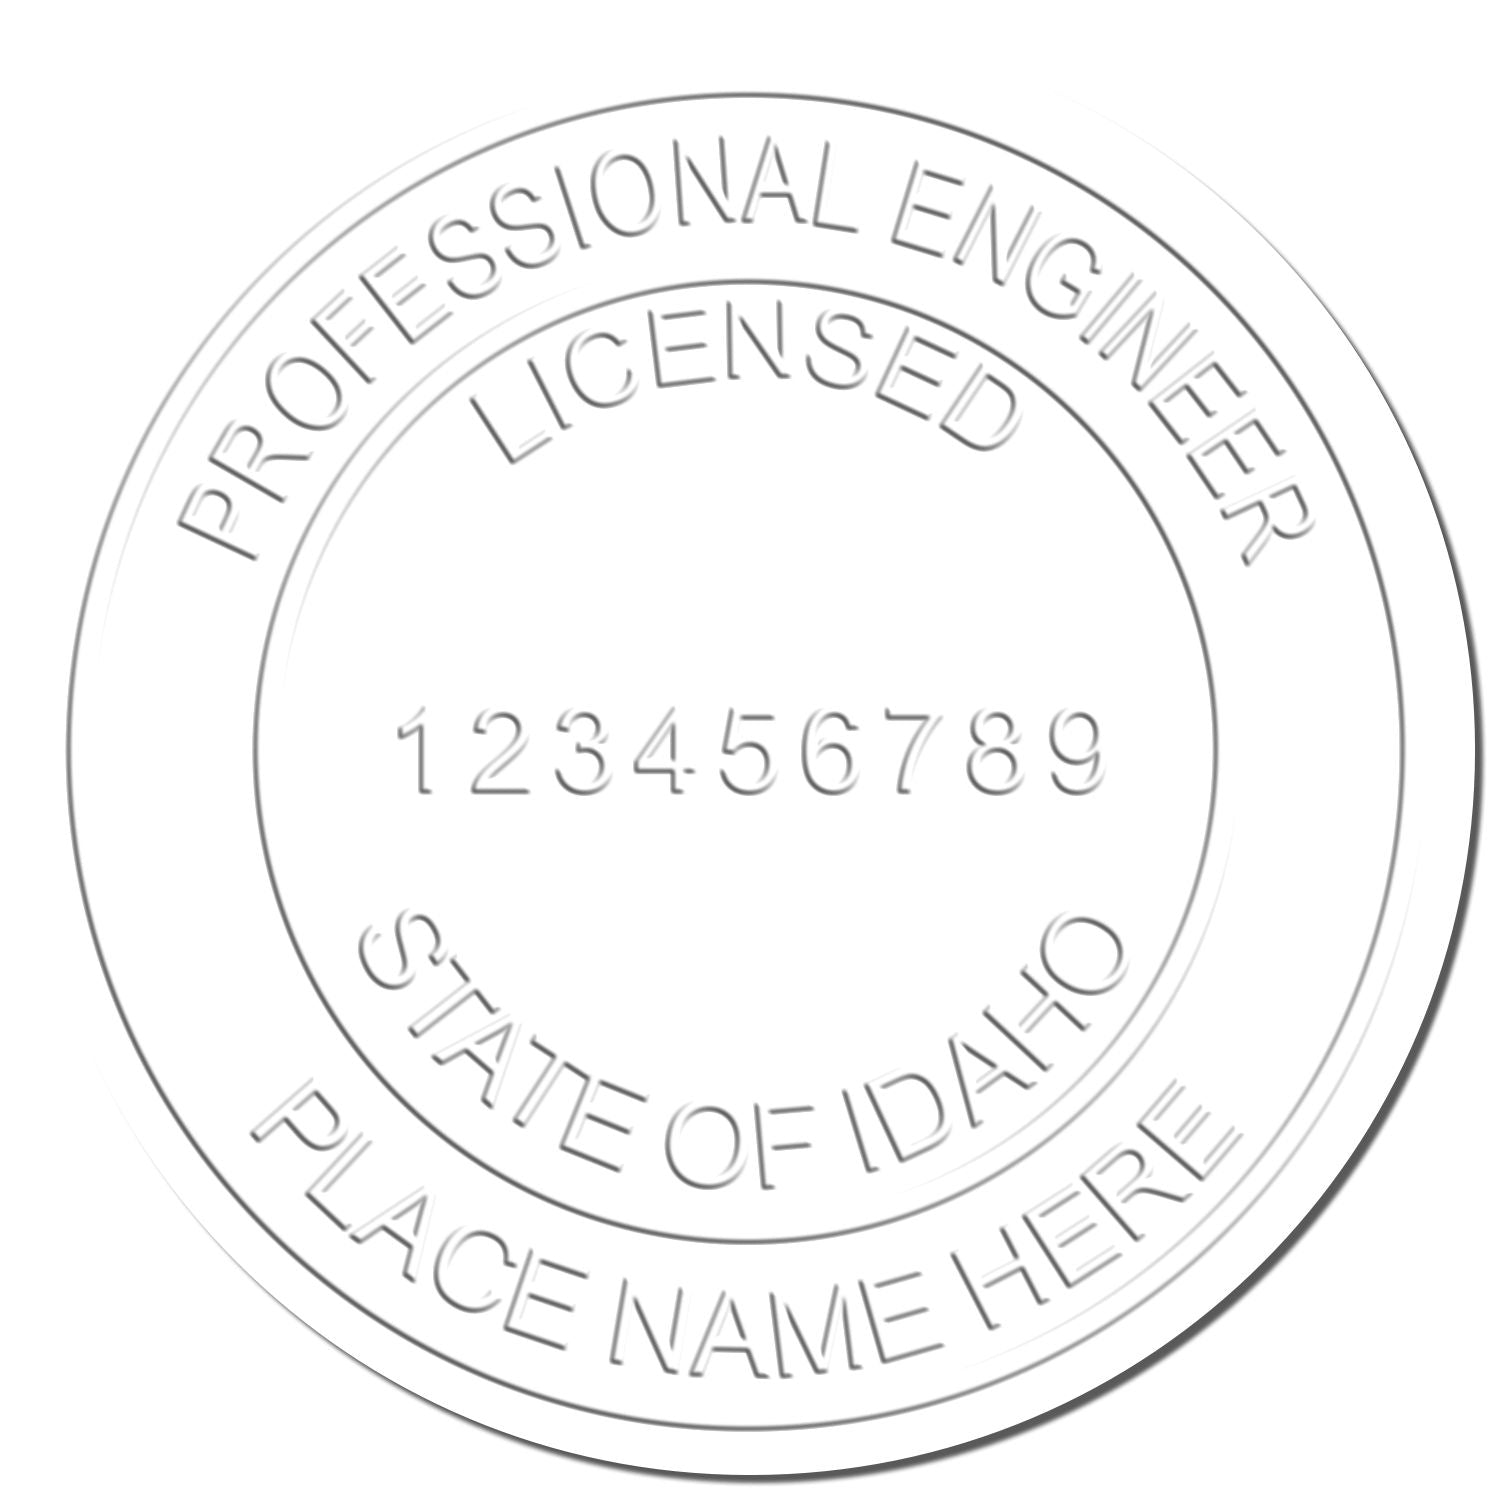 The main image for the Idaho Engineer Desk Seal depicting a sample of the imprint and electronic files